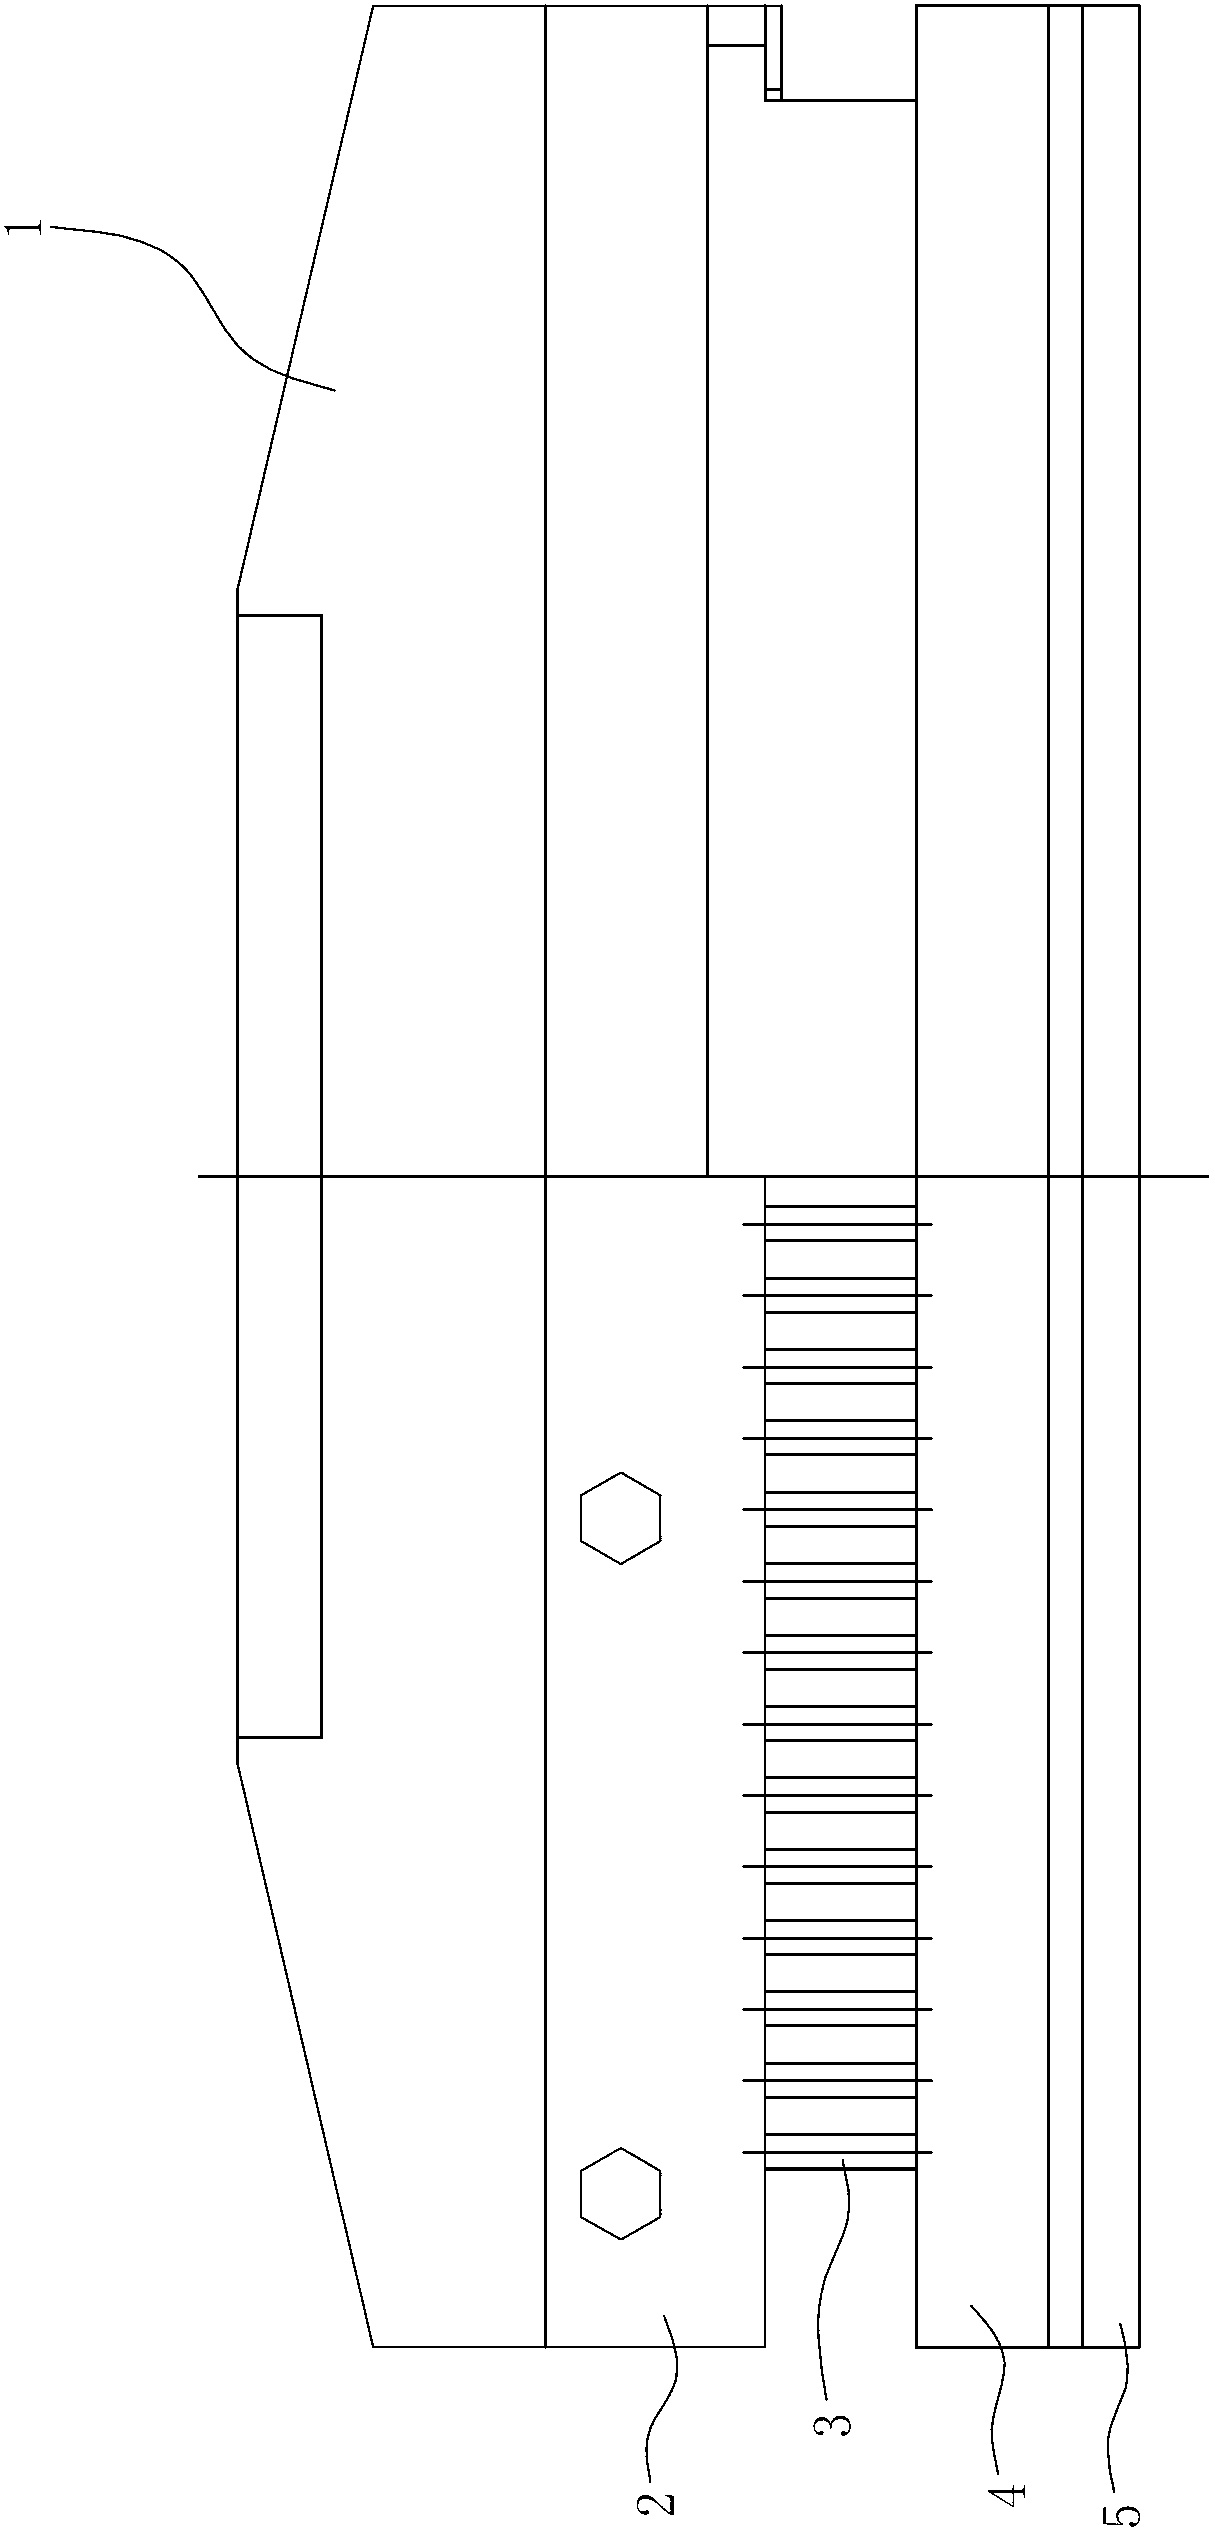 Die for punching holes and forming tear line on paper product